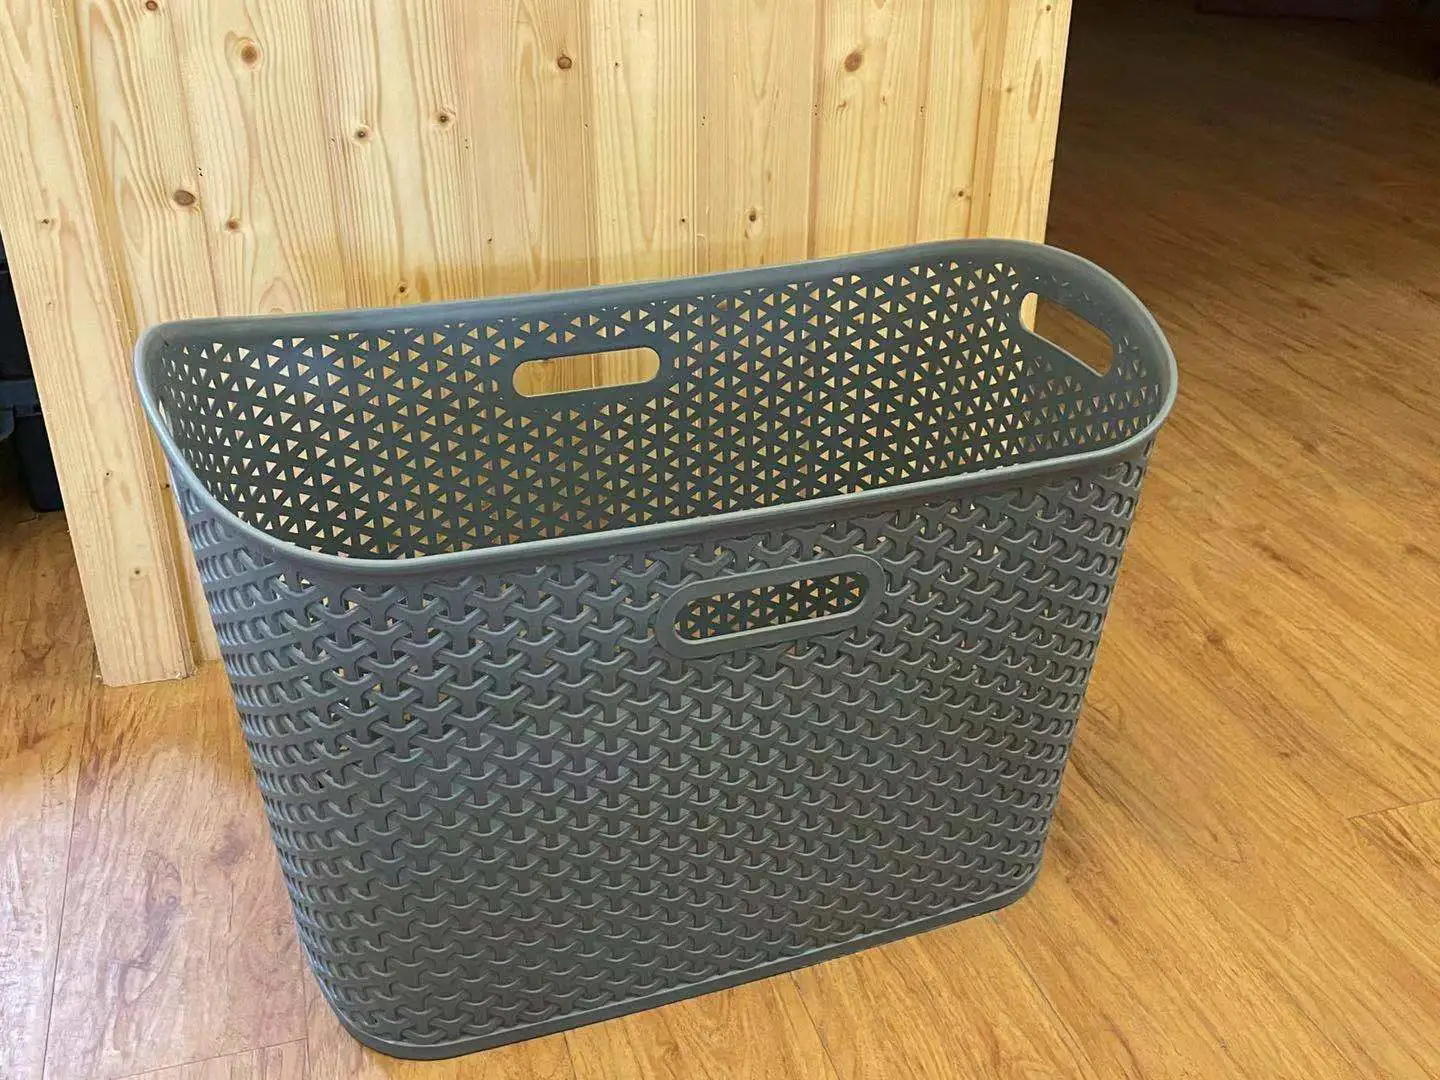 Plastic Wicker Laundry Basket has many different styles